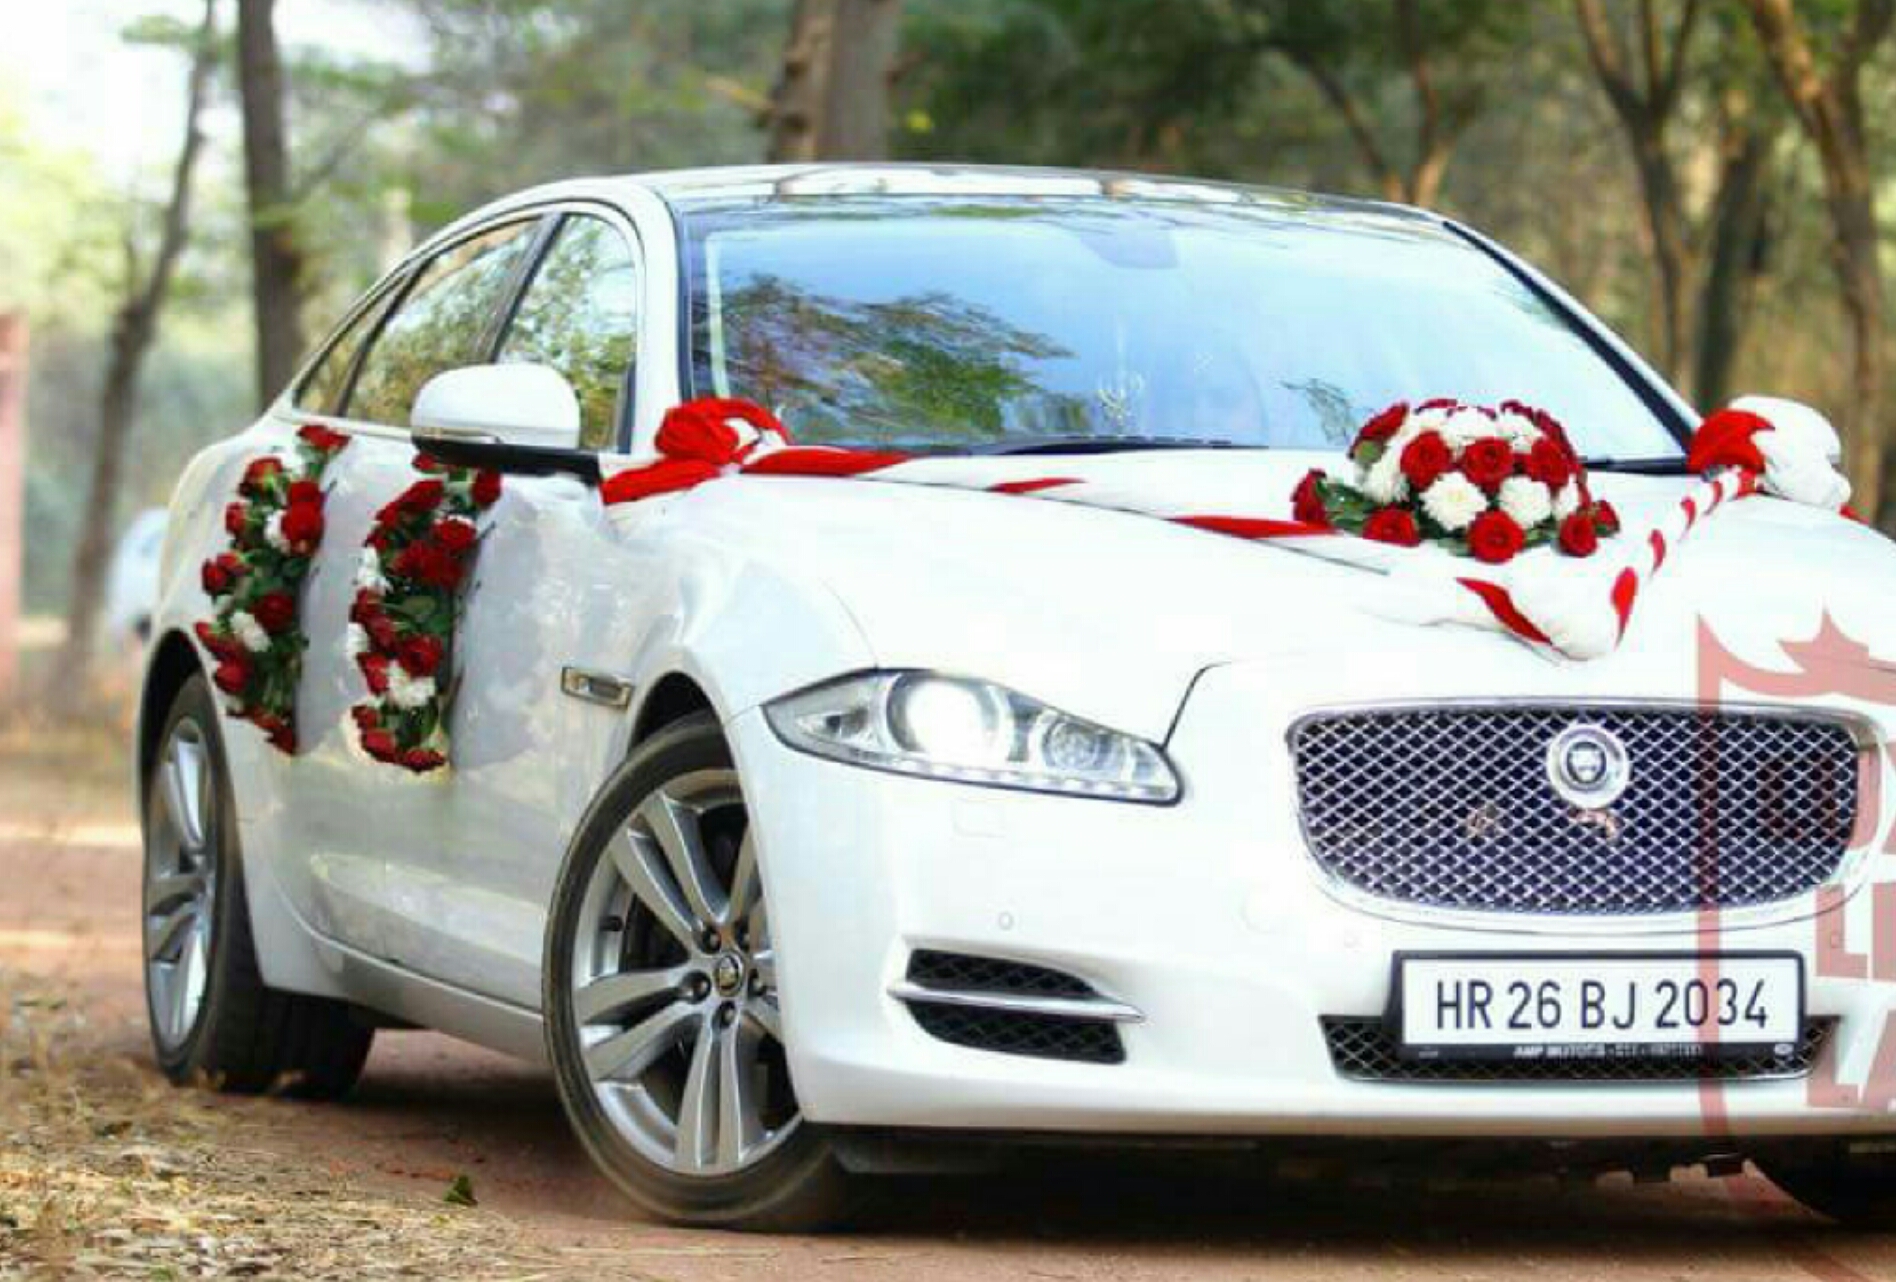 Jaguar XJ L - long wheel base sedan for extra comfort &; space, style and lixurious well standard arriving.